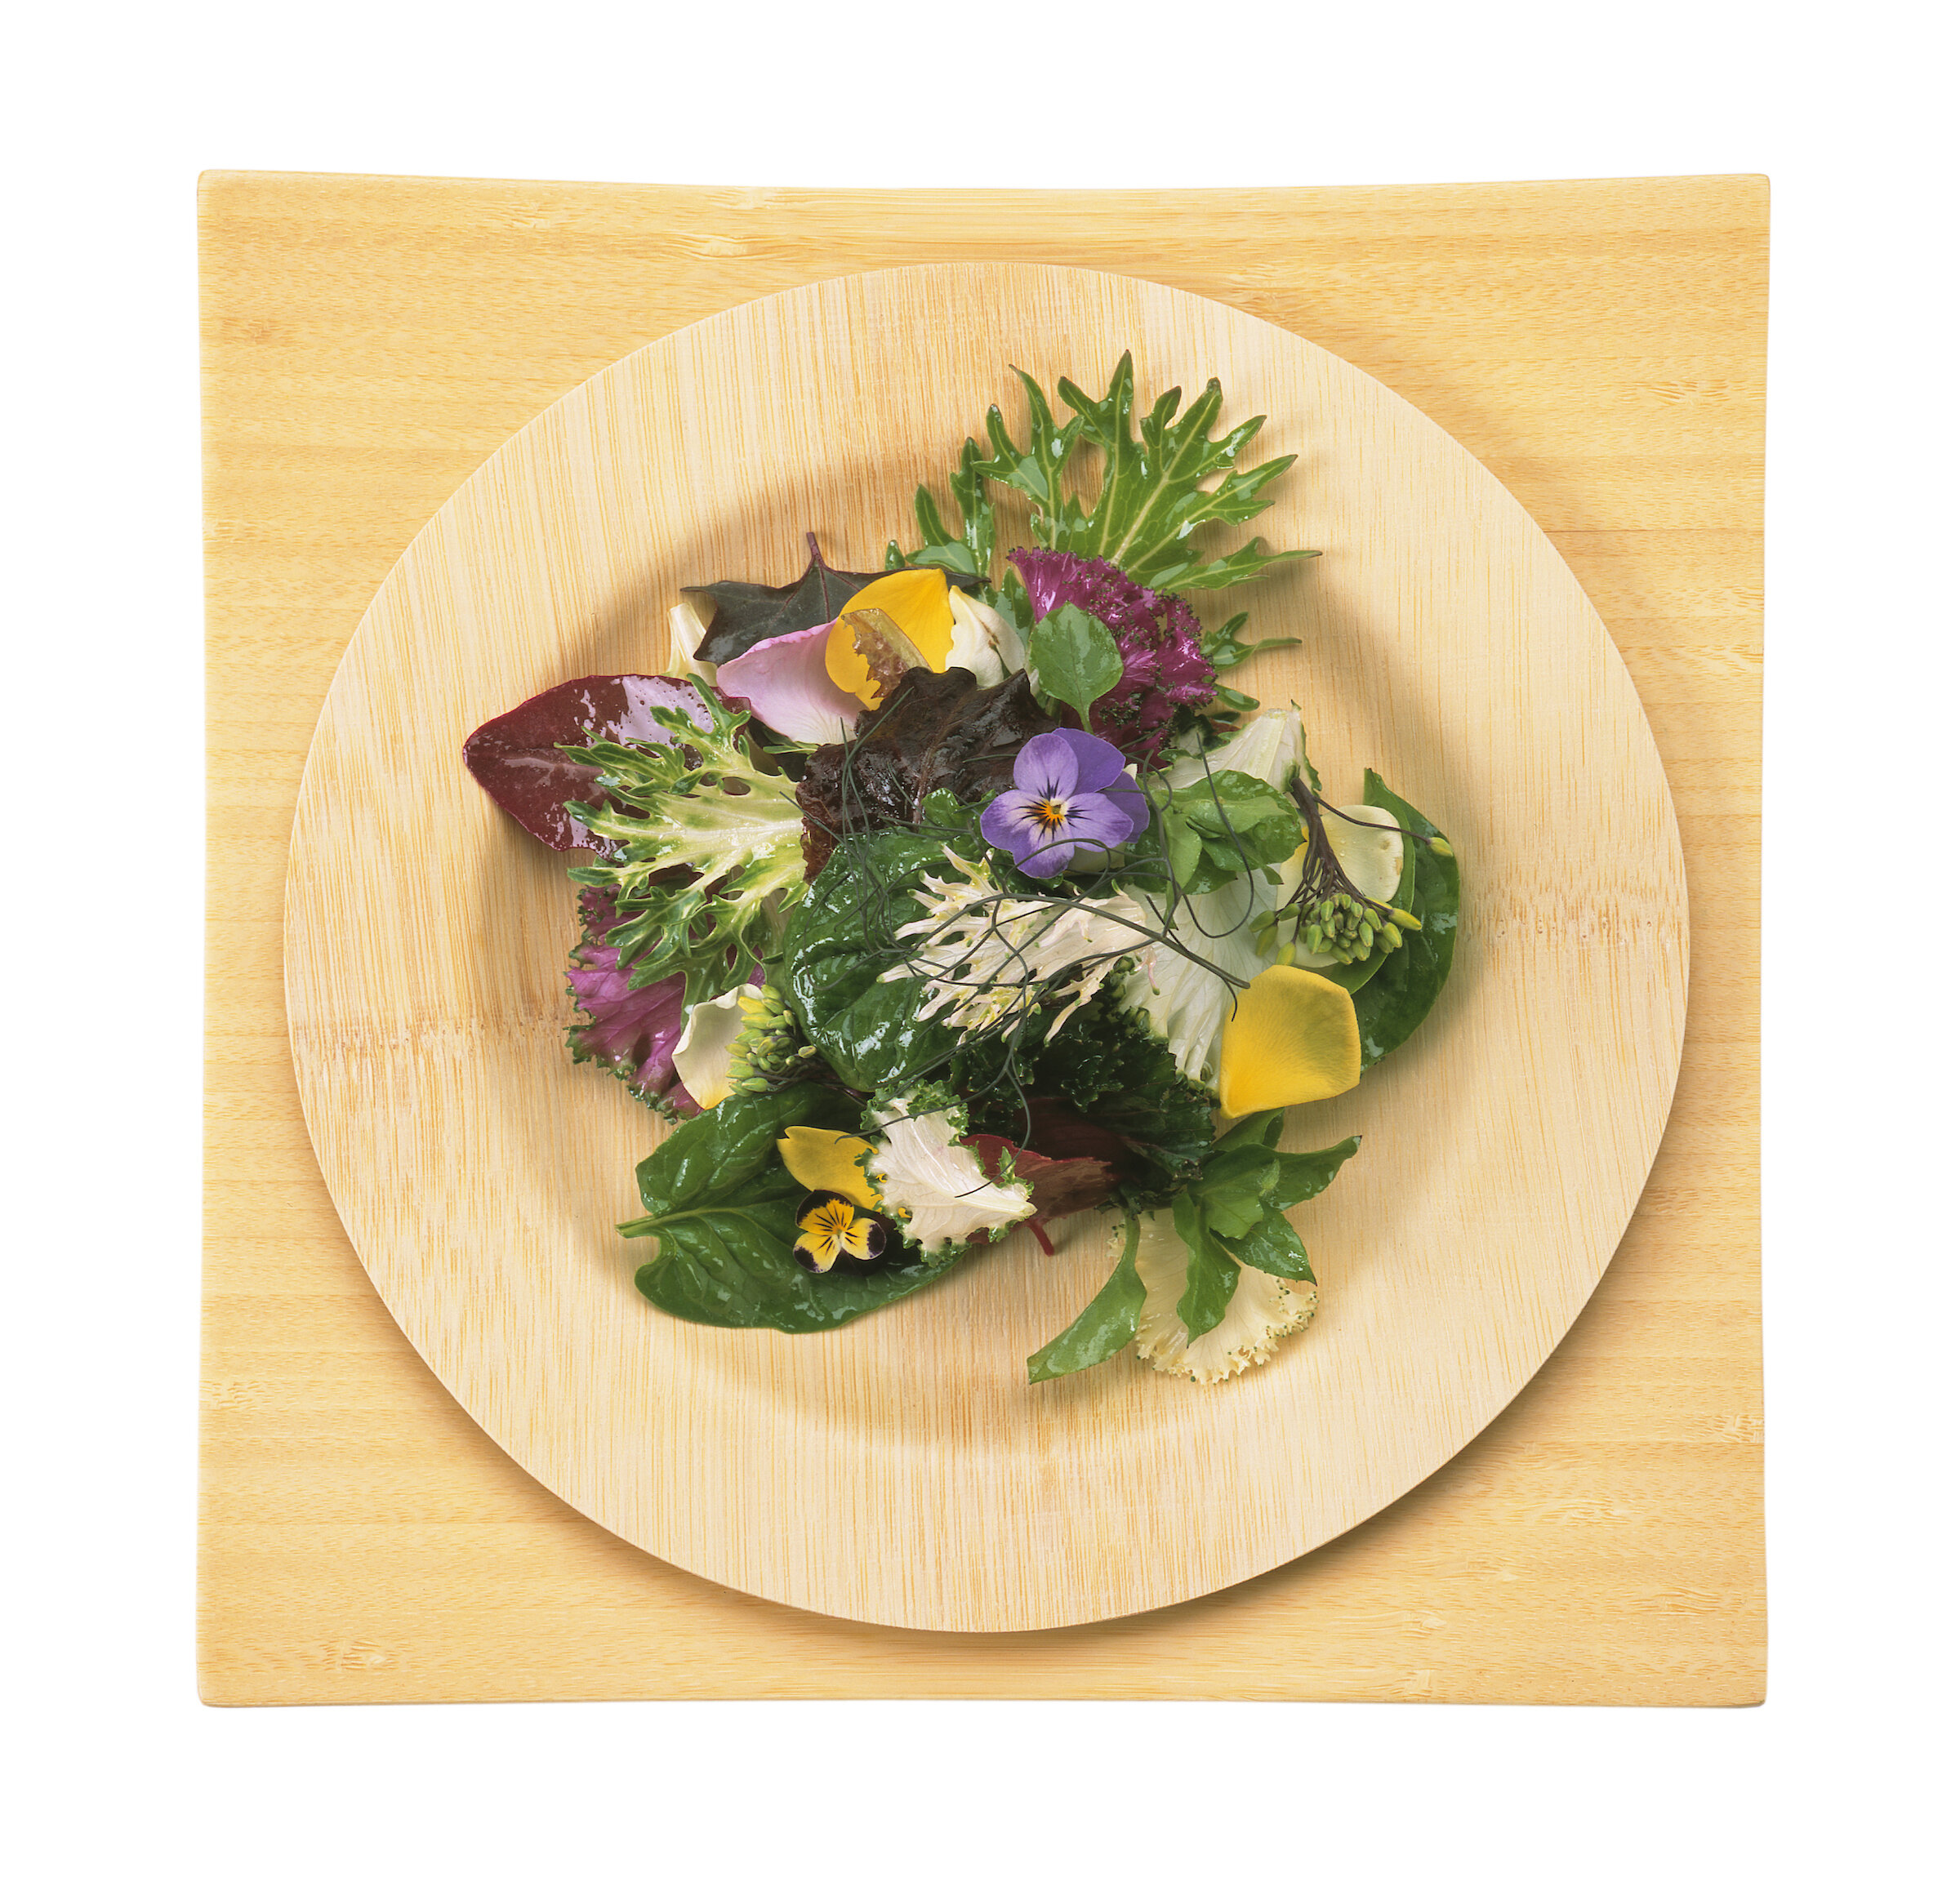 alad with edible flowers on bamboo plate.jpg